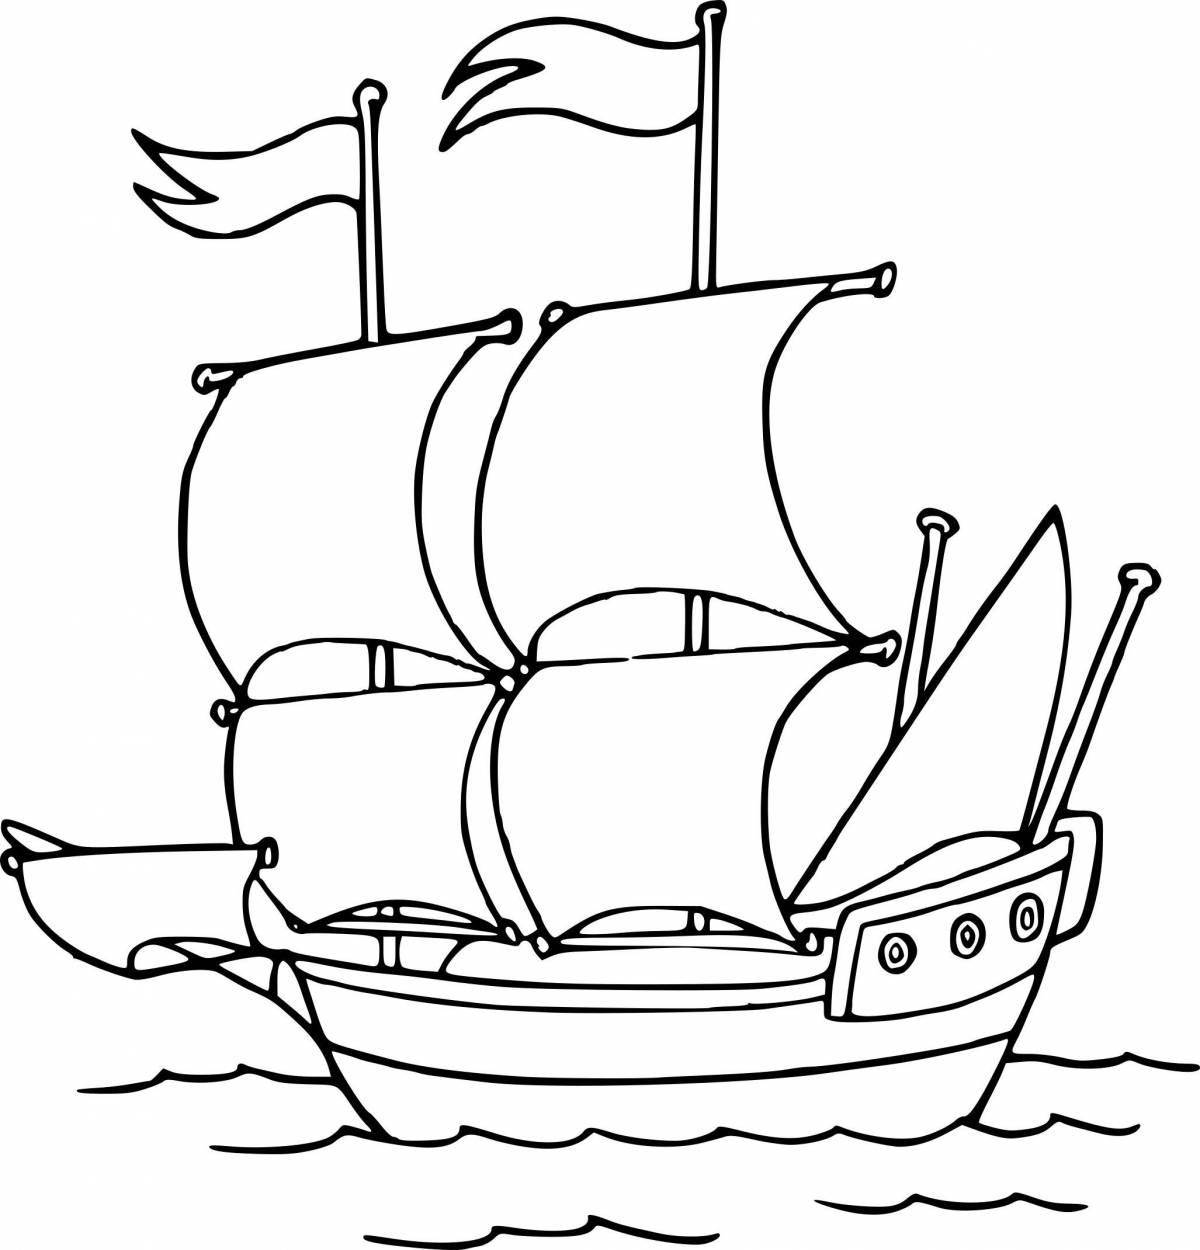 Color boat coloring for children 2-3 years old